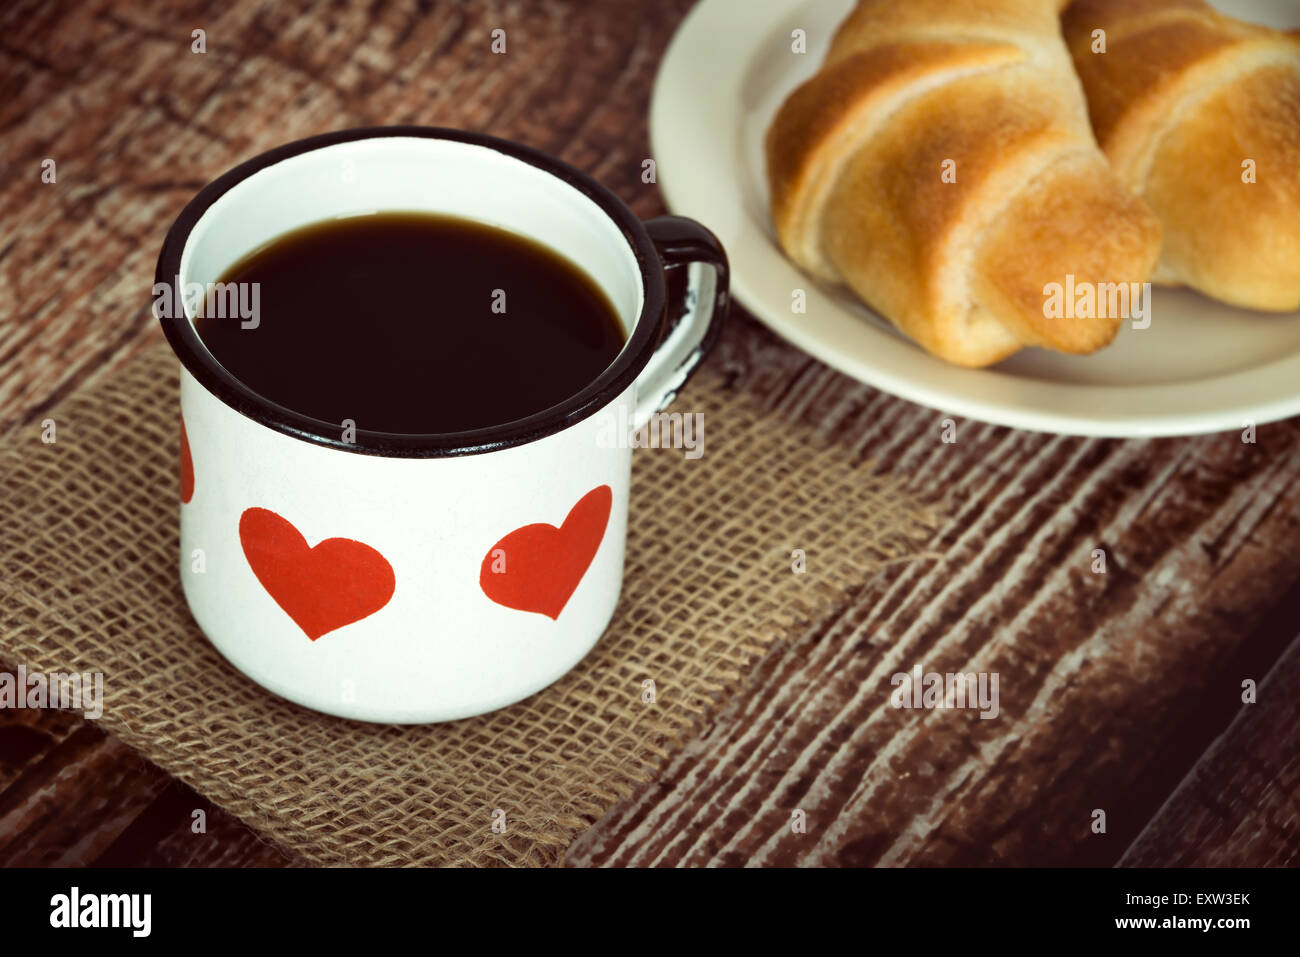 A cup of black coffee in an old enamel mug, breakfast croissants on background, vintage rustic table Stock Photo